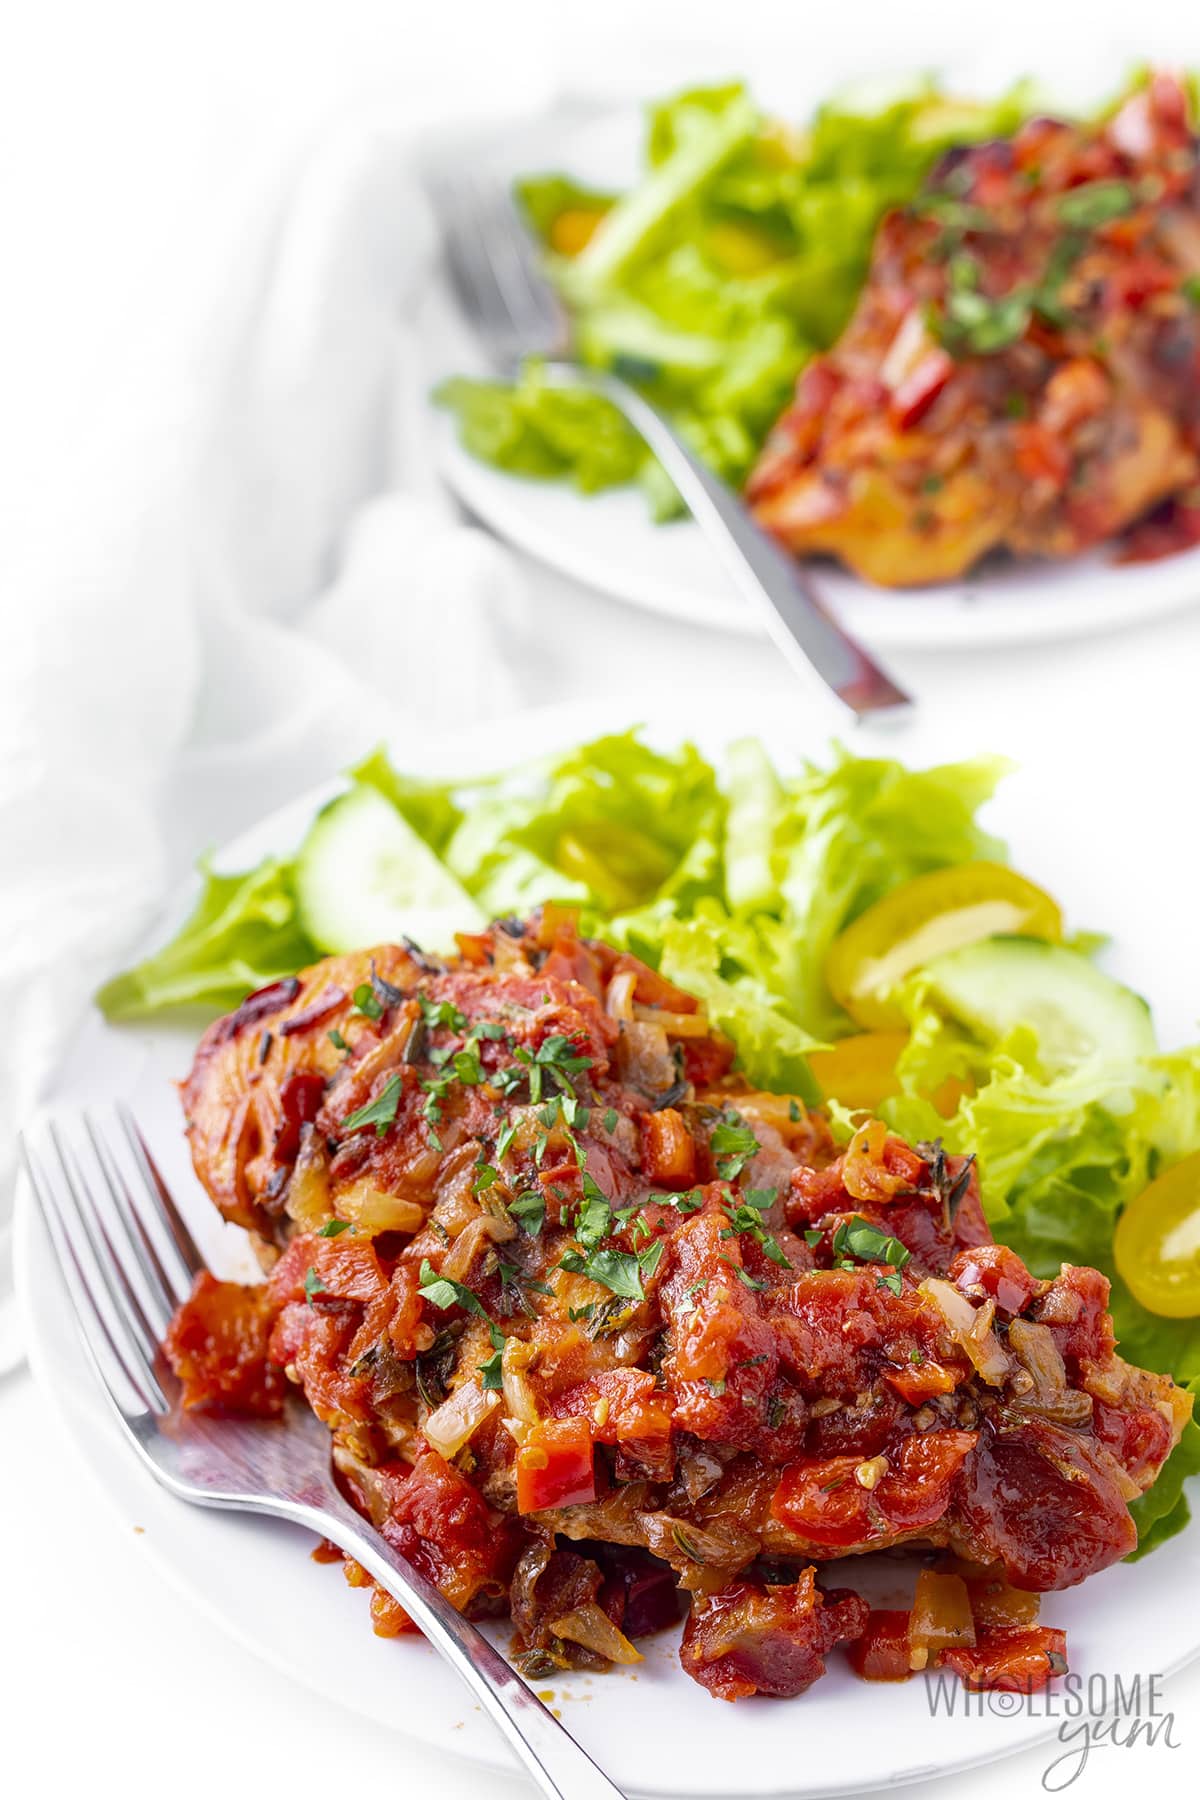 Slow cooker chicken cacciatore on a plate with salad